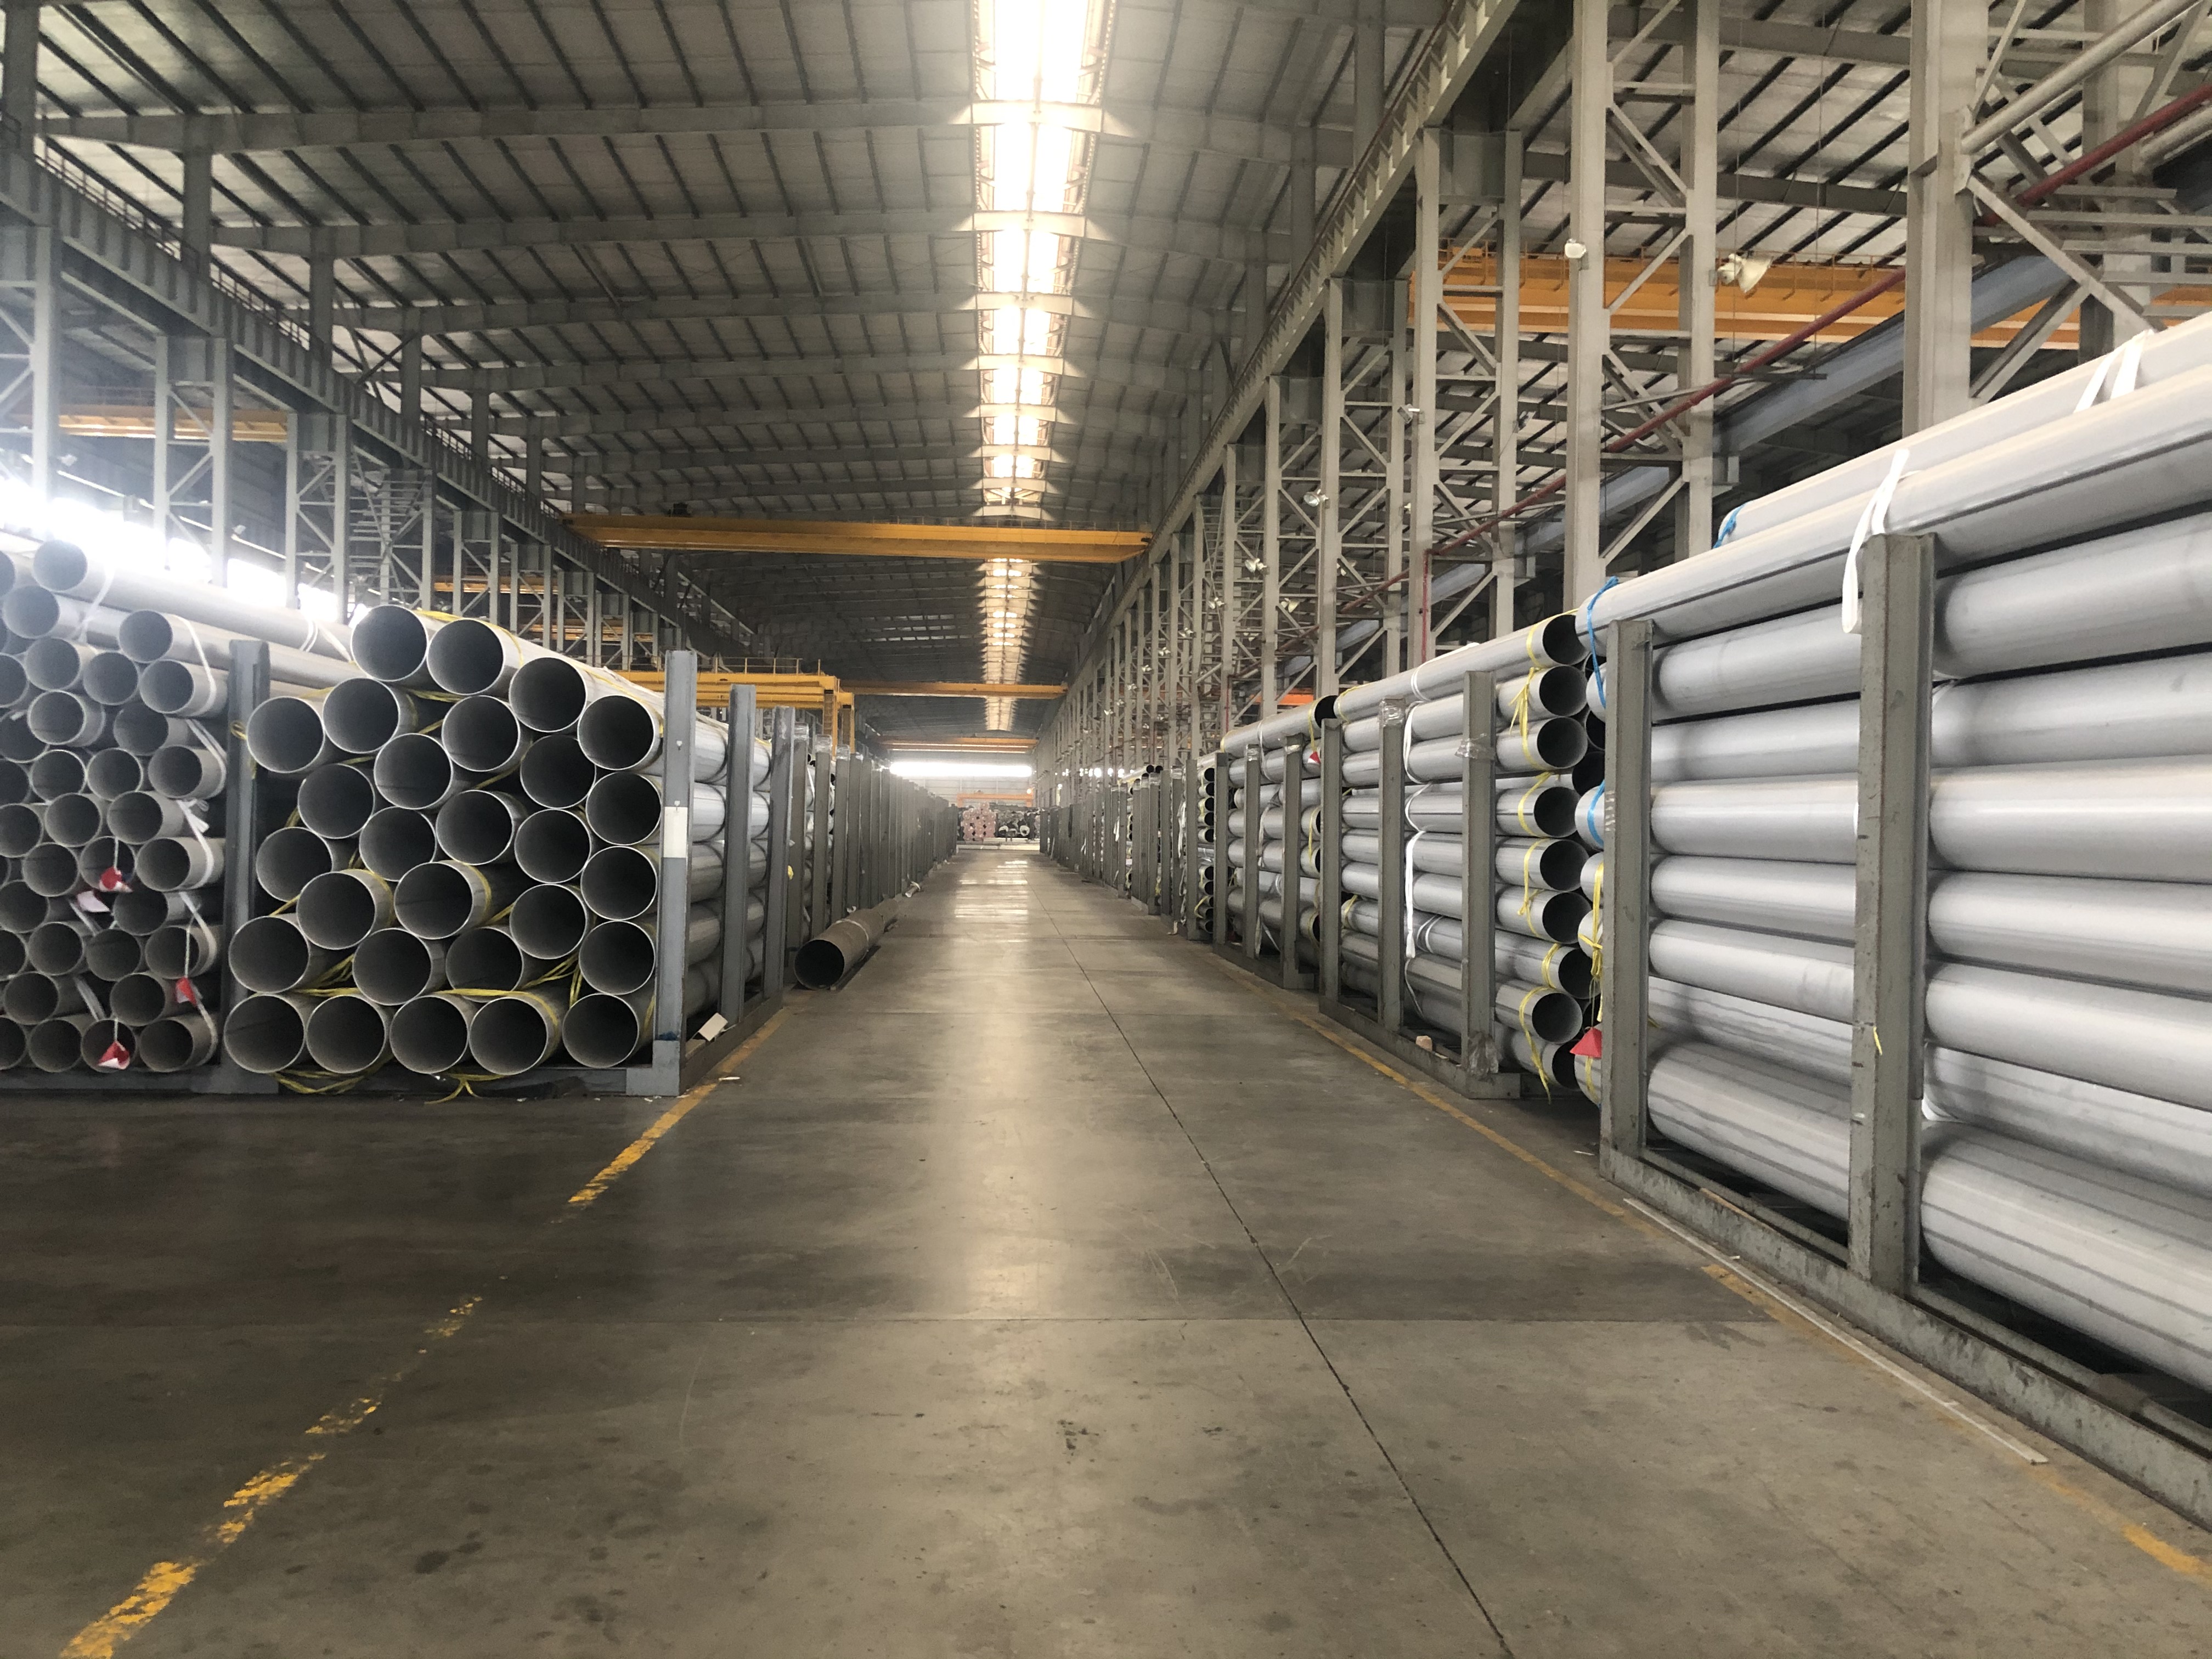 ASTM A790 / A790M – 16: Standard Specification for Seamless and Welded Ferritic/Austenitic Stainless Steel Pipe